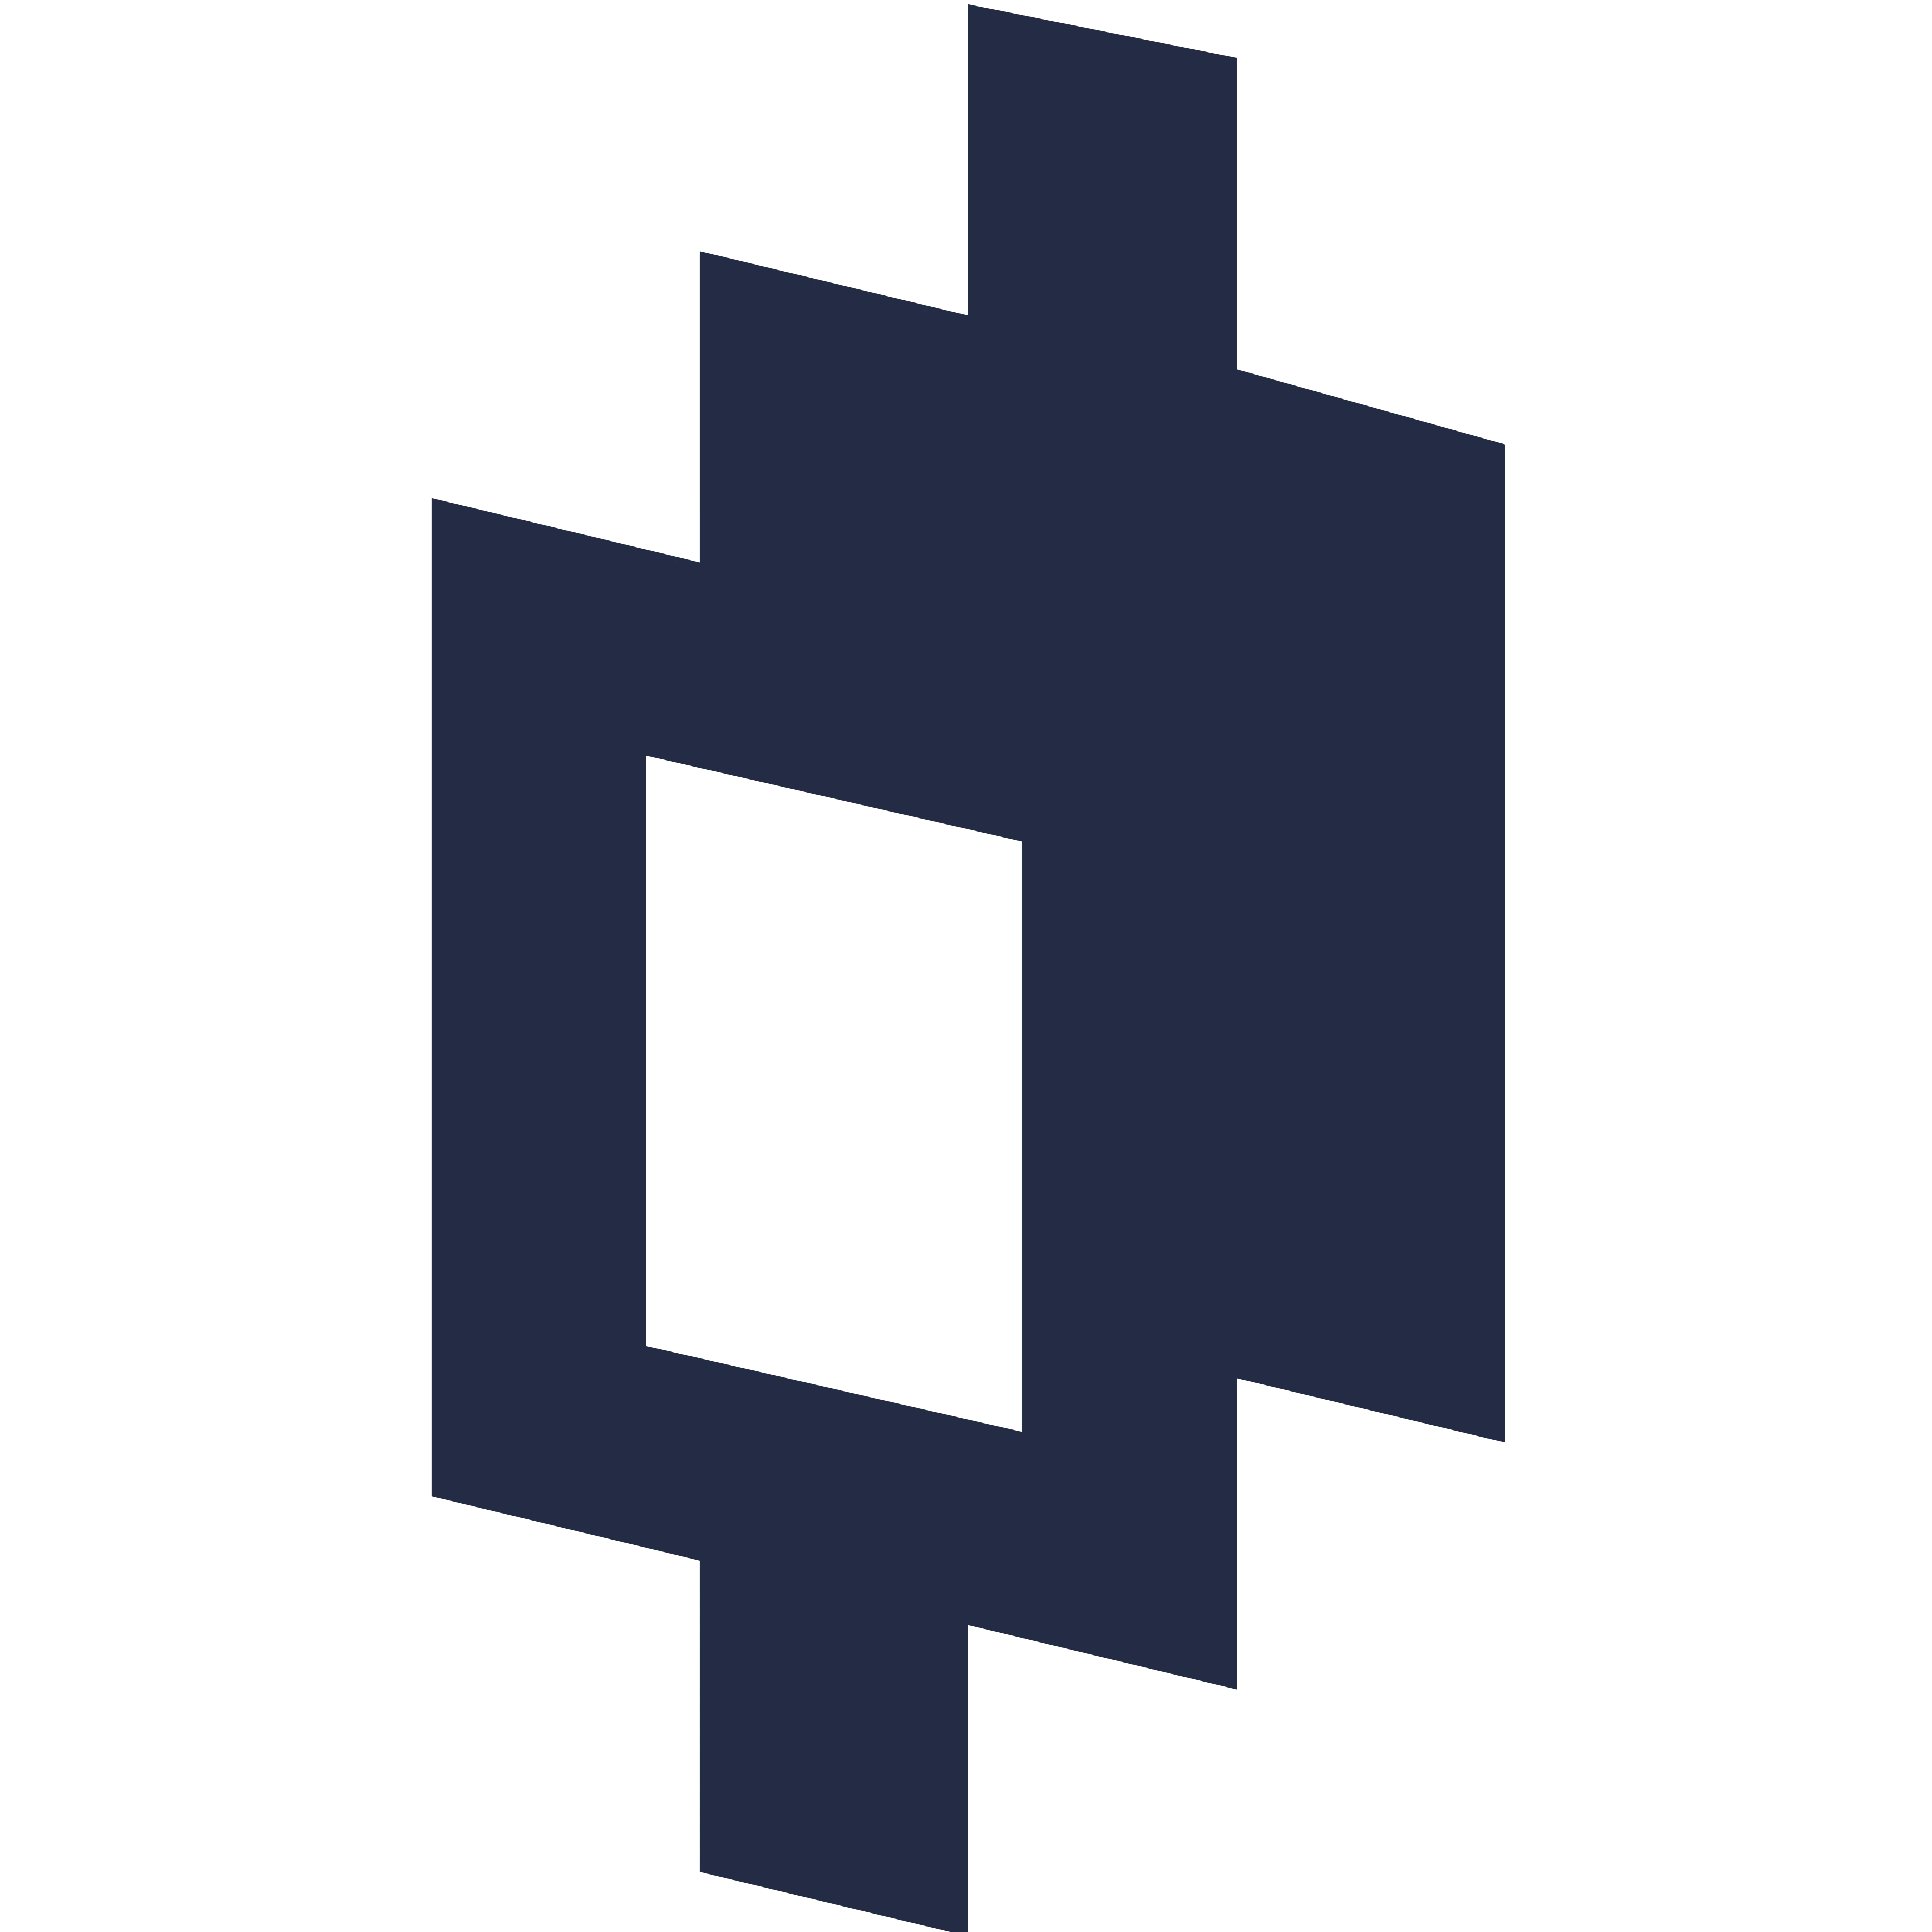 Mirror Protocol logo in png format